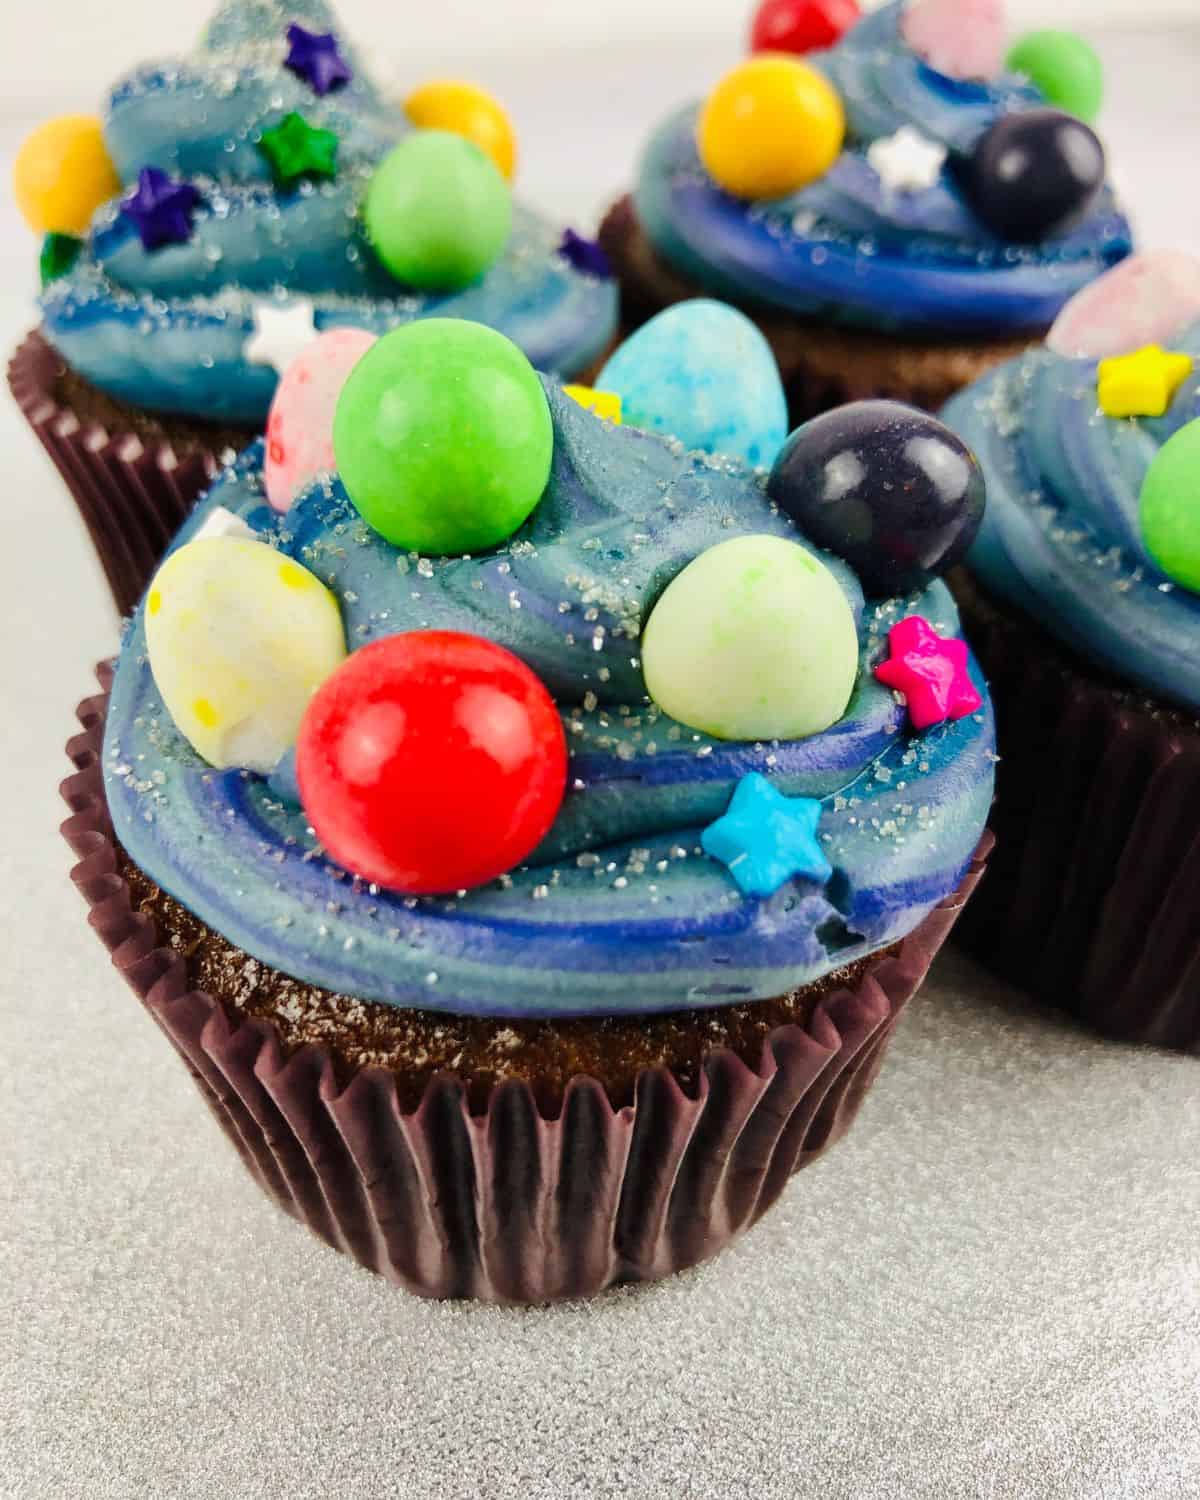 Chocolate cupcakes decorated with the galaxy theme. 